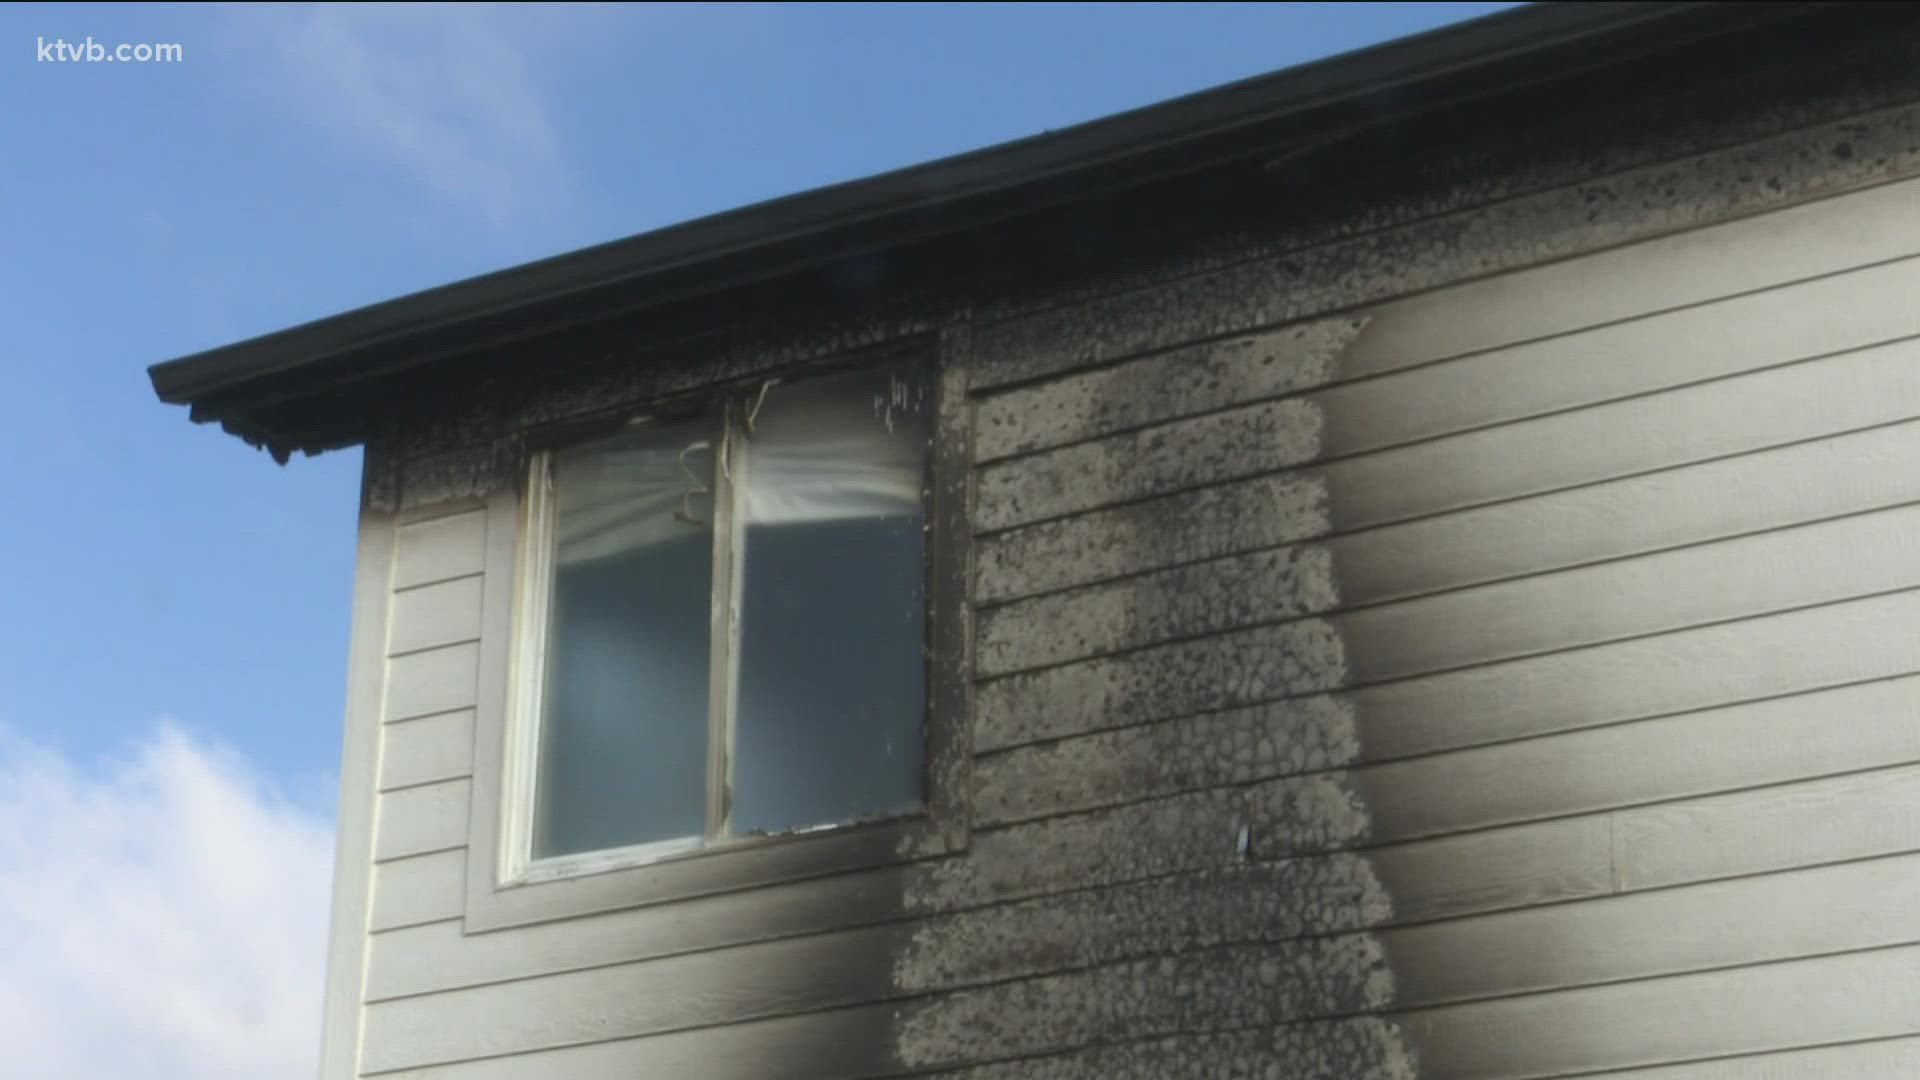 Chantell Lee and her family had only been living in their Homedale house for less than a year when a fire Wednesday morning severely damaged it.